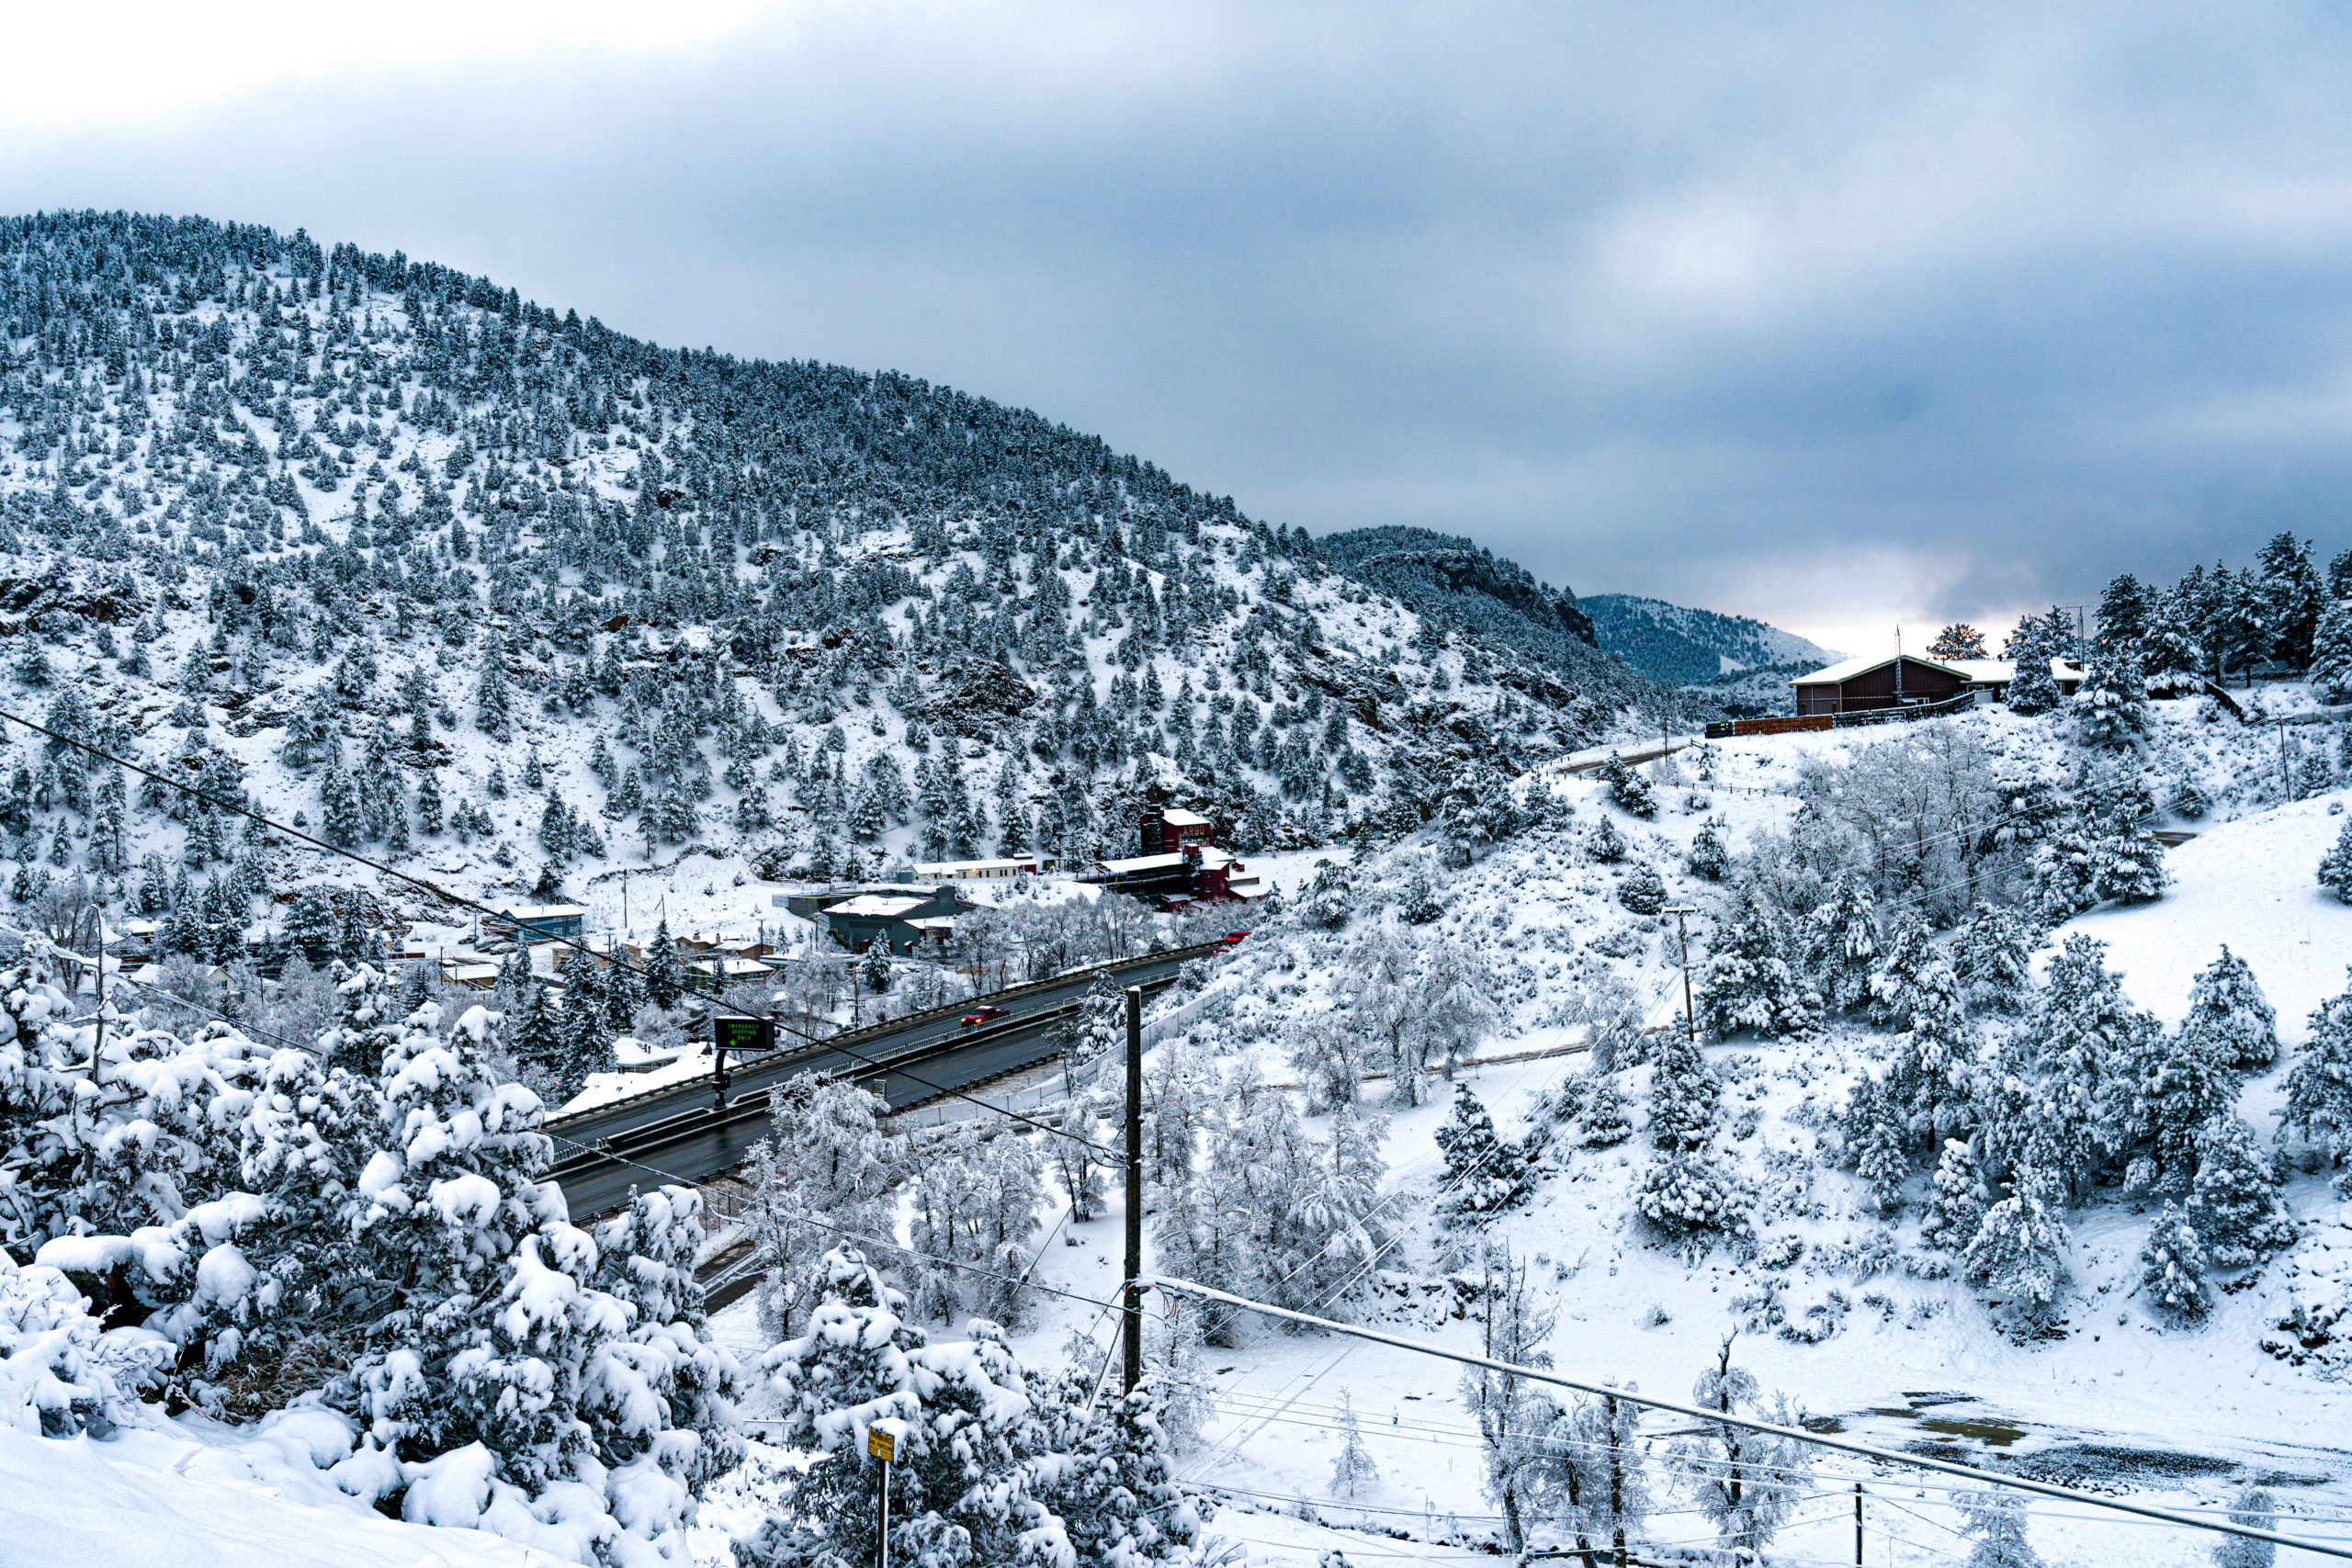 The town of Idaho Springs in the winter covered in snow